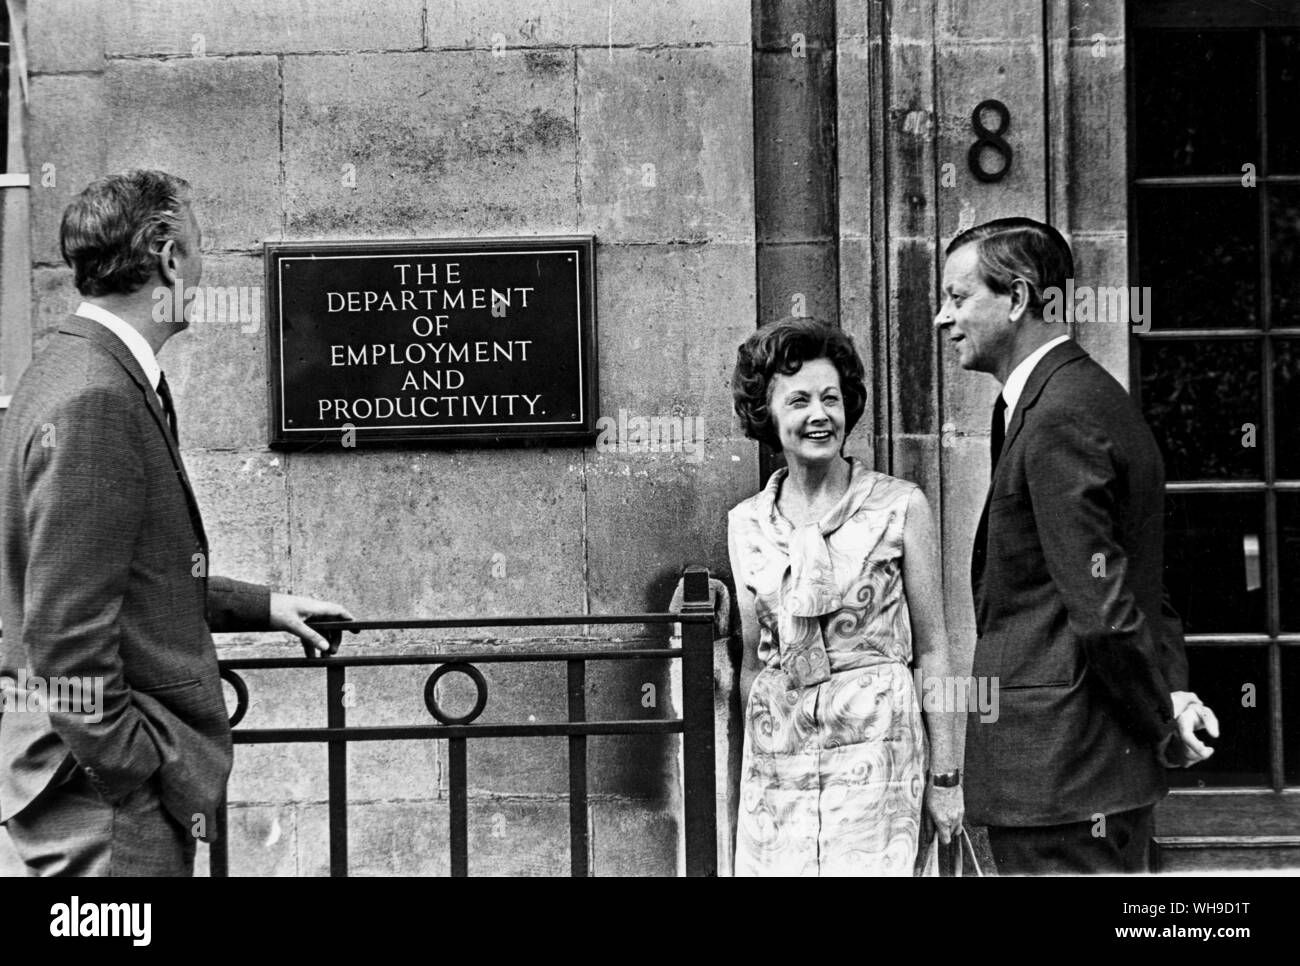 15th May 1968: Mrs Barbara Castle, born 1911, Minister of Employment and Productivity, with her top aides at the Ministry, Sir Denis Barnes, permanent secretary (left) and Alex Jarrat (right), pictured at the Ministry. Stock Photo